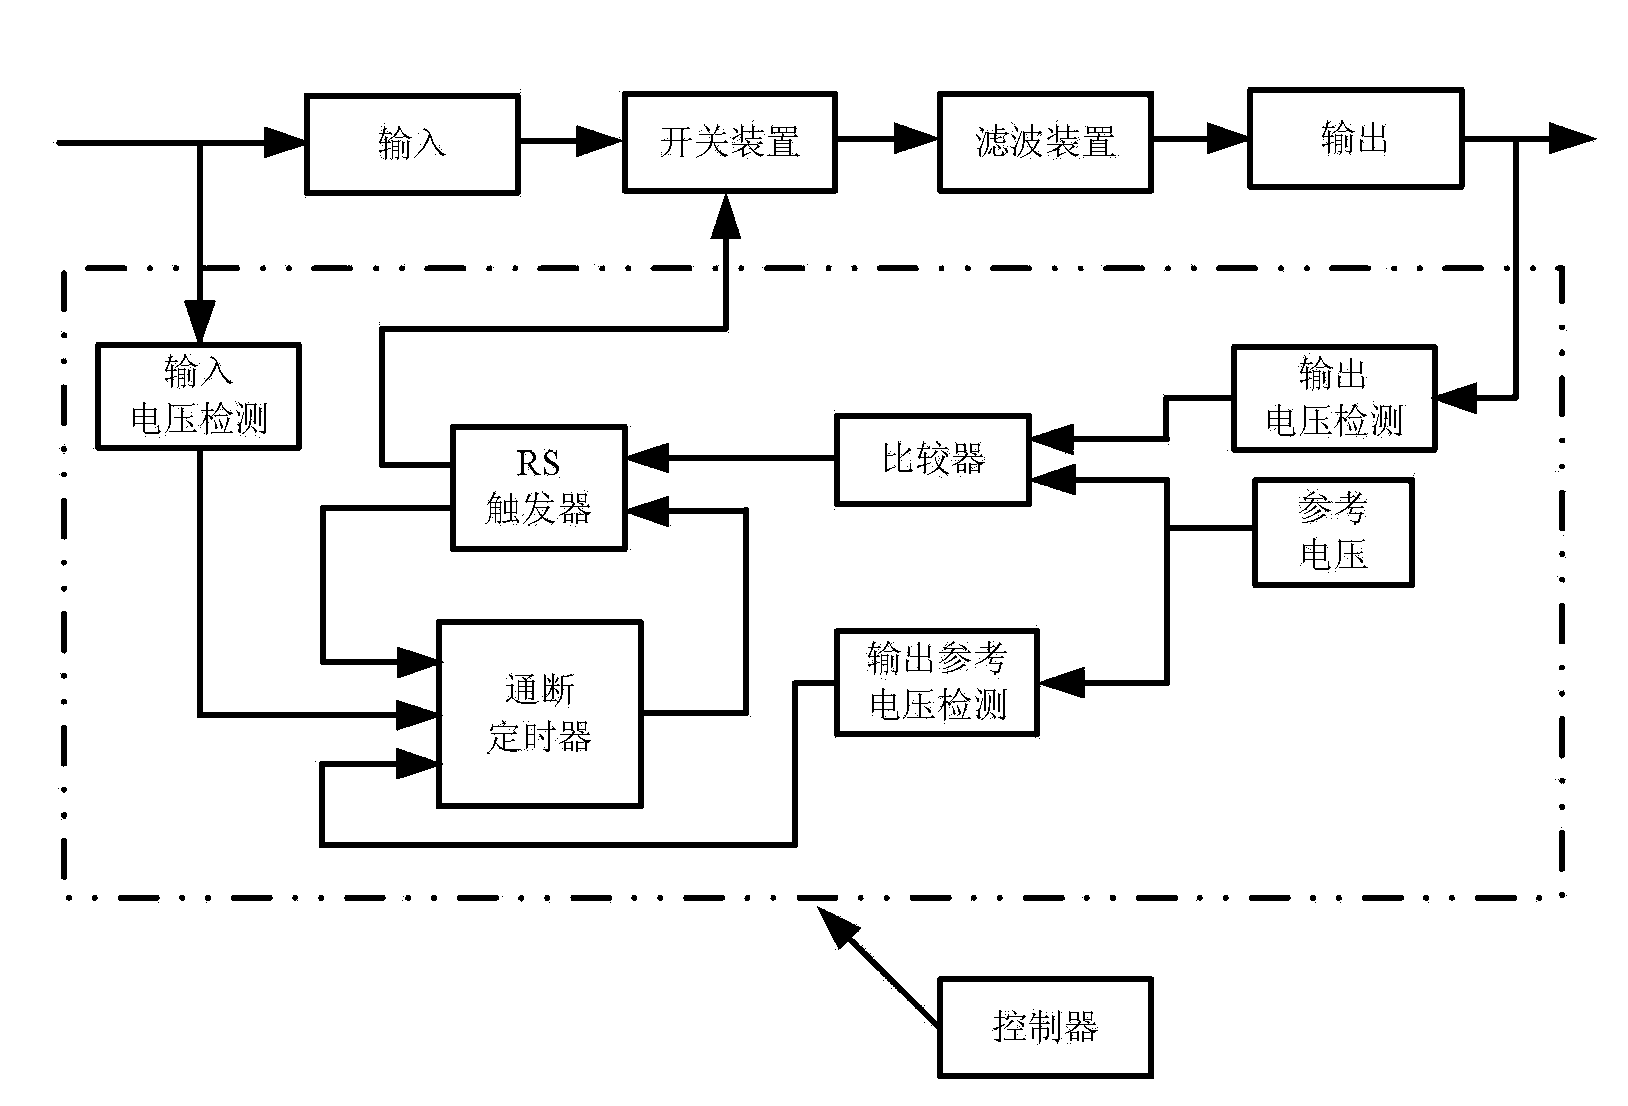 Fixed-frequency constant on-off time control method of dynamic voltage regulating switch converter